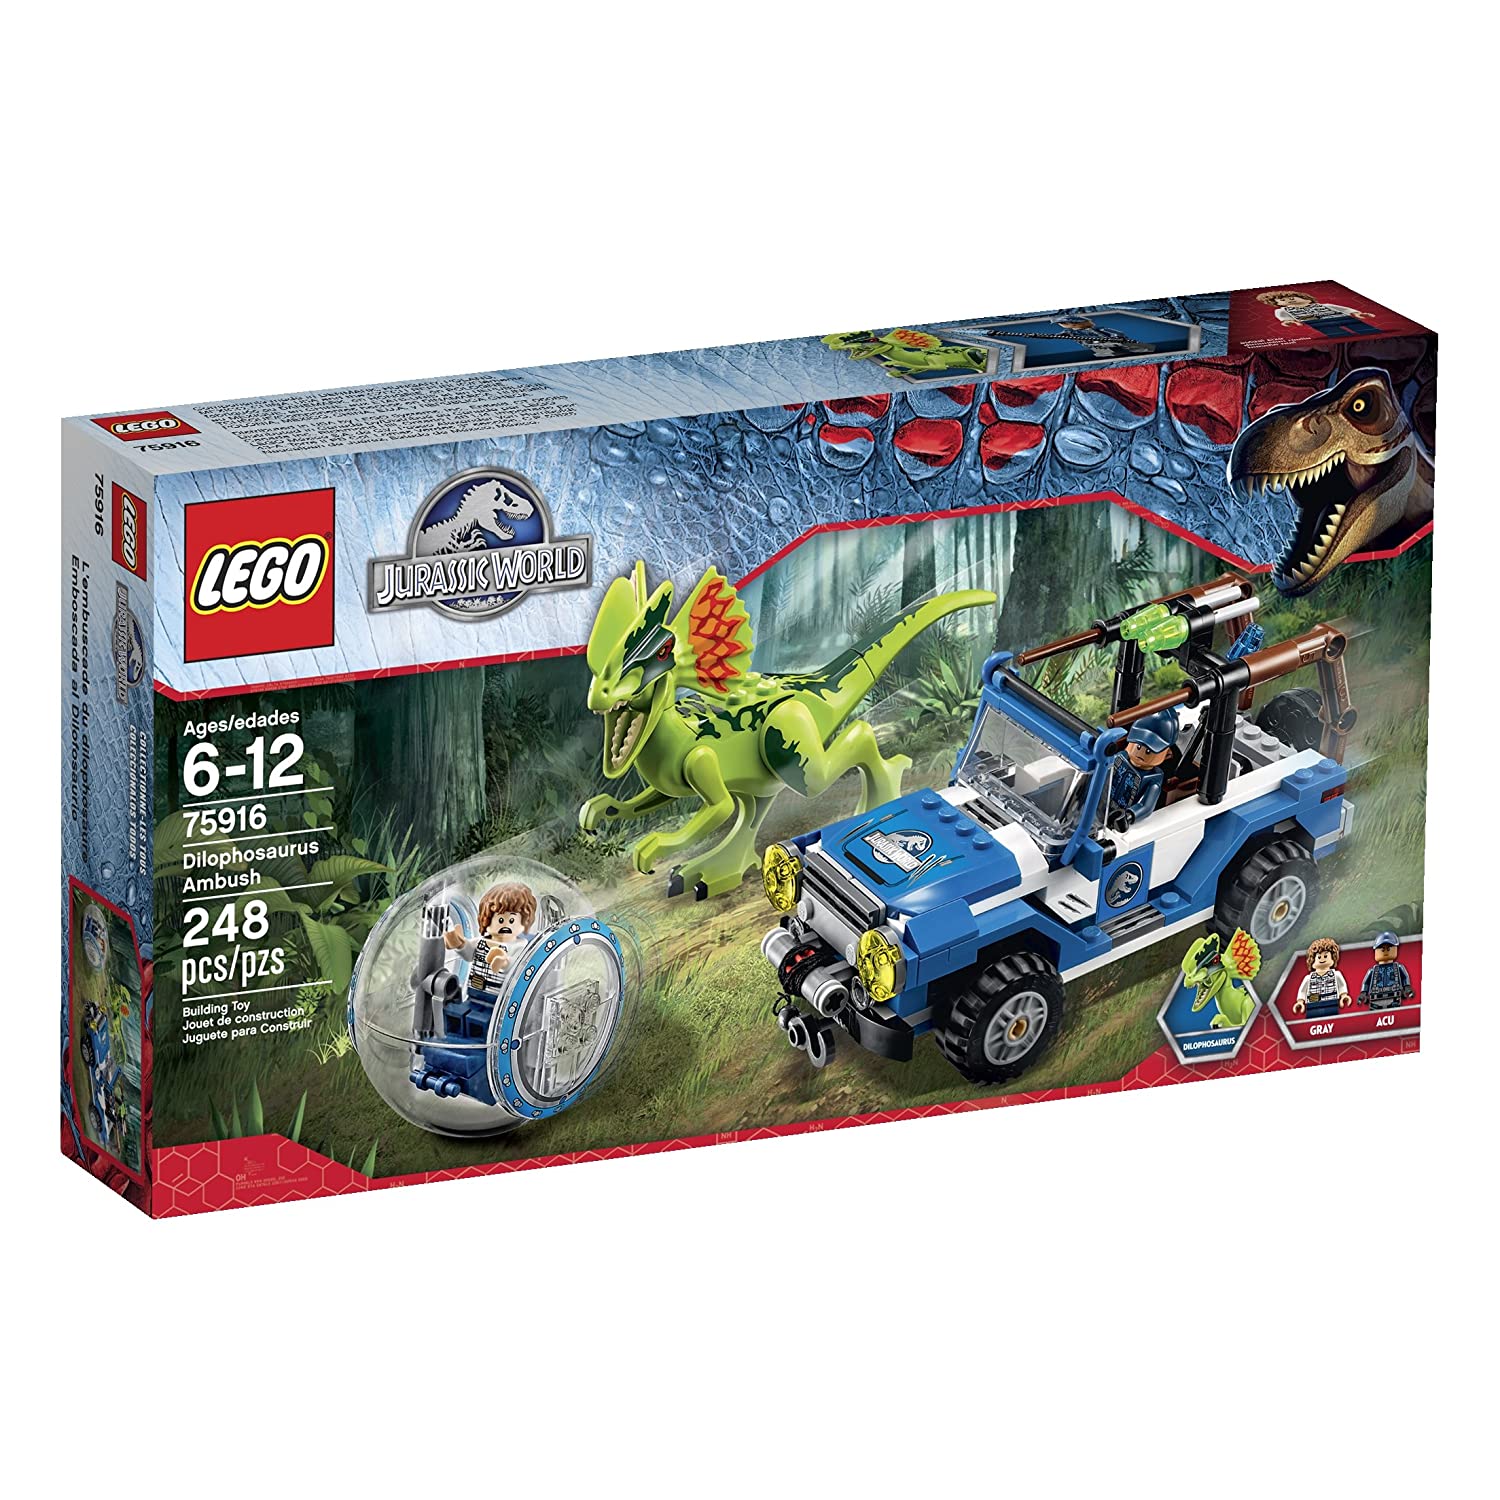 Top 8 Best Lego Dinosaurs Set Reviews in 2023 2